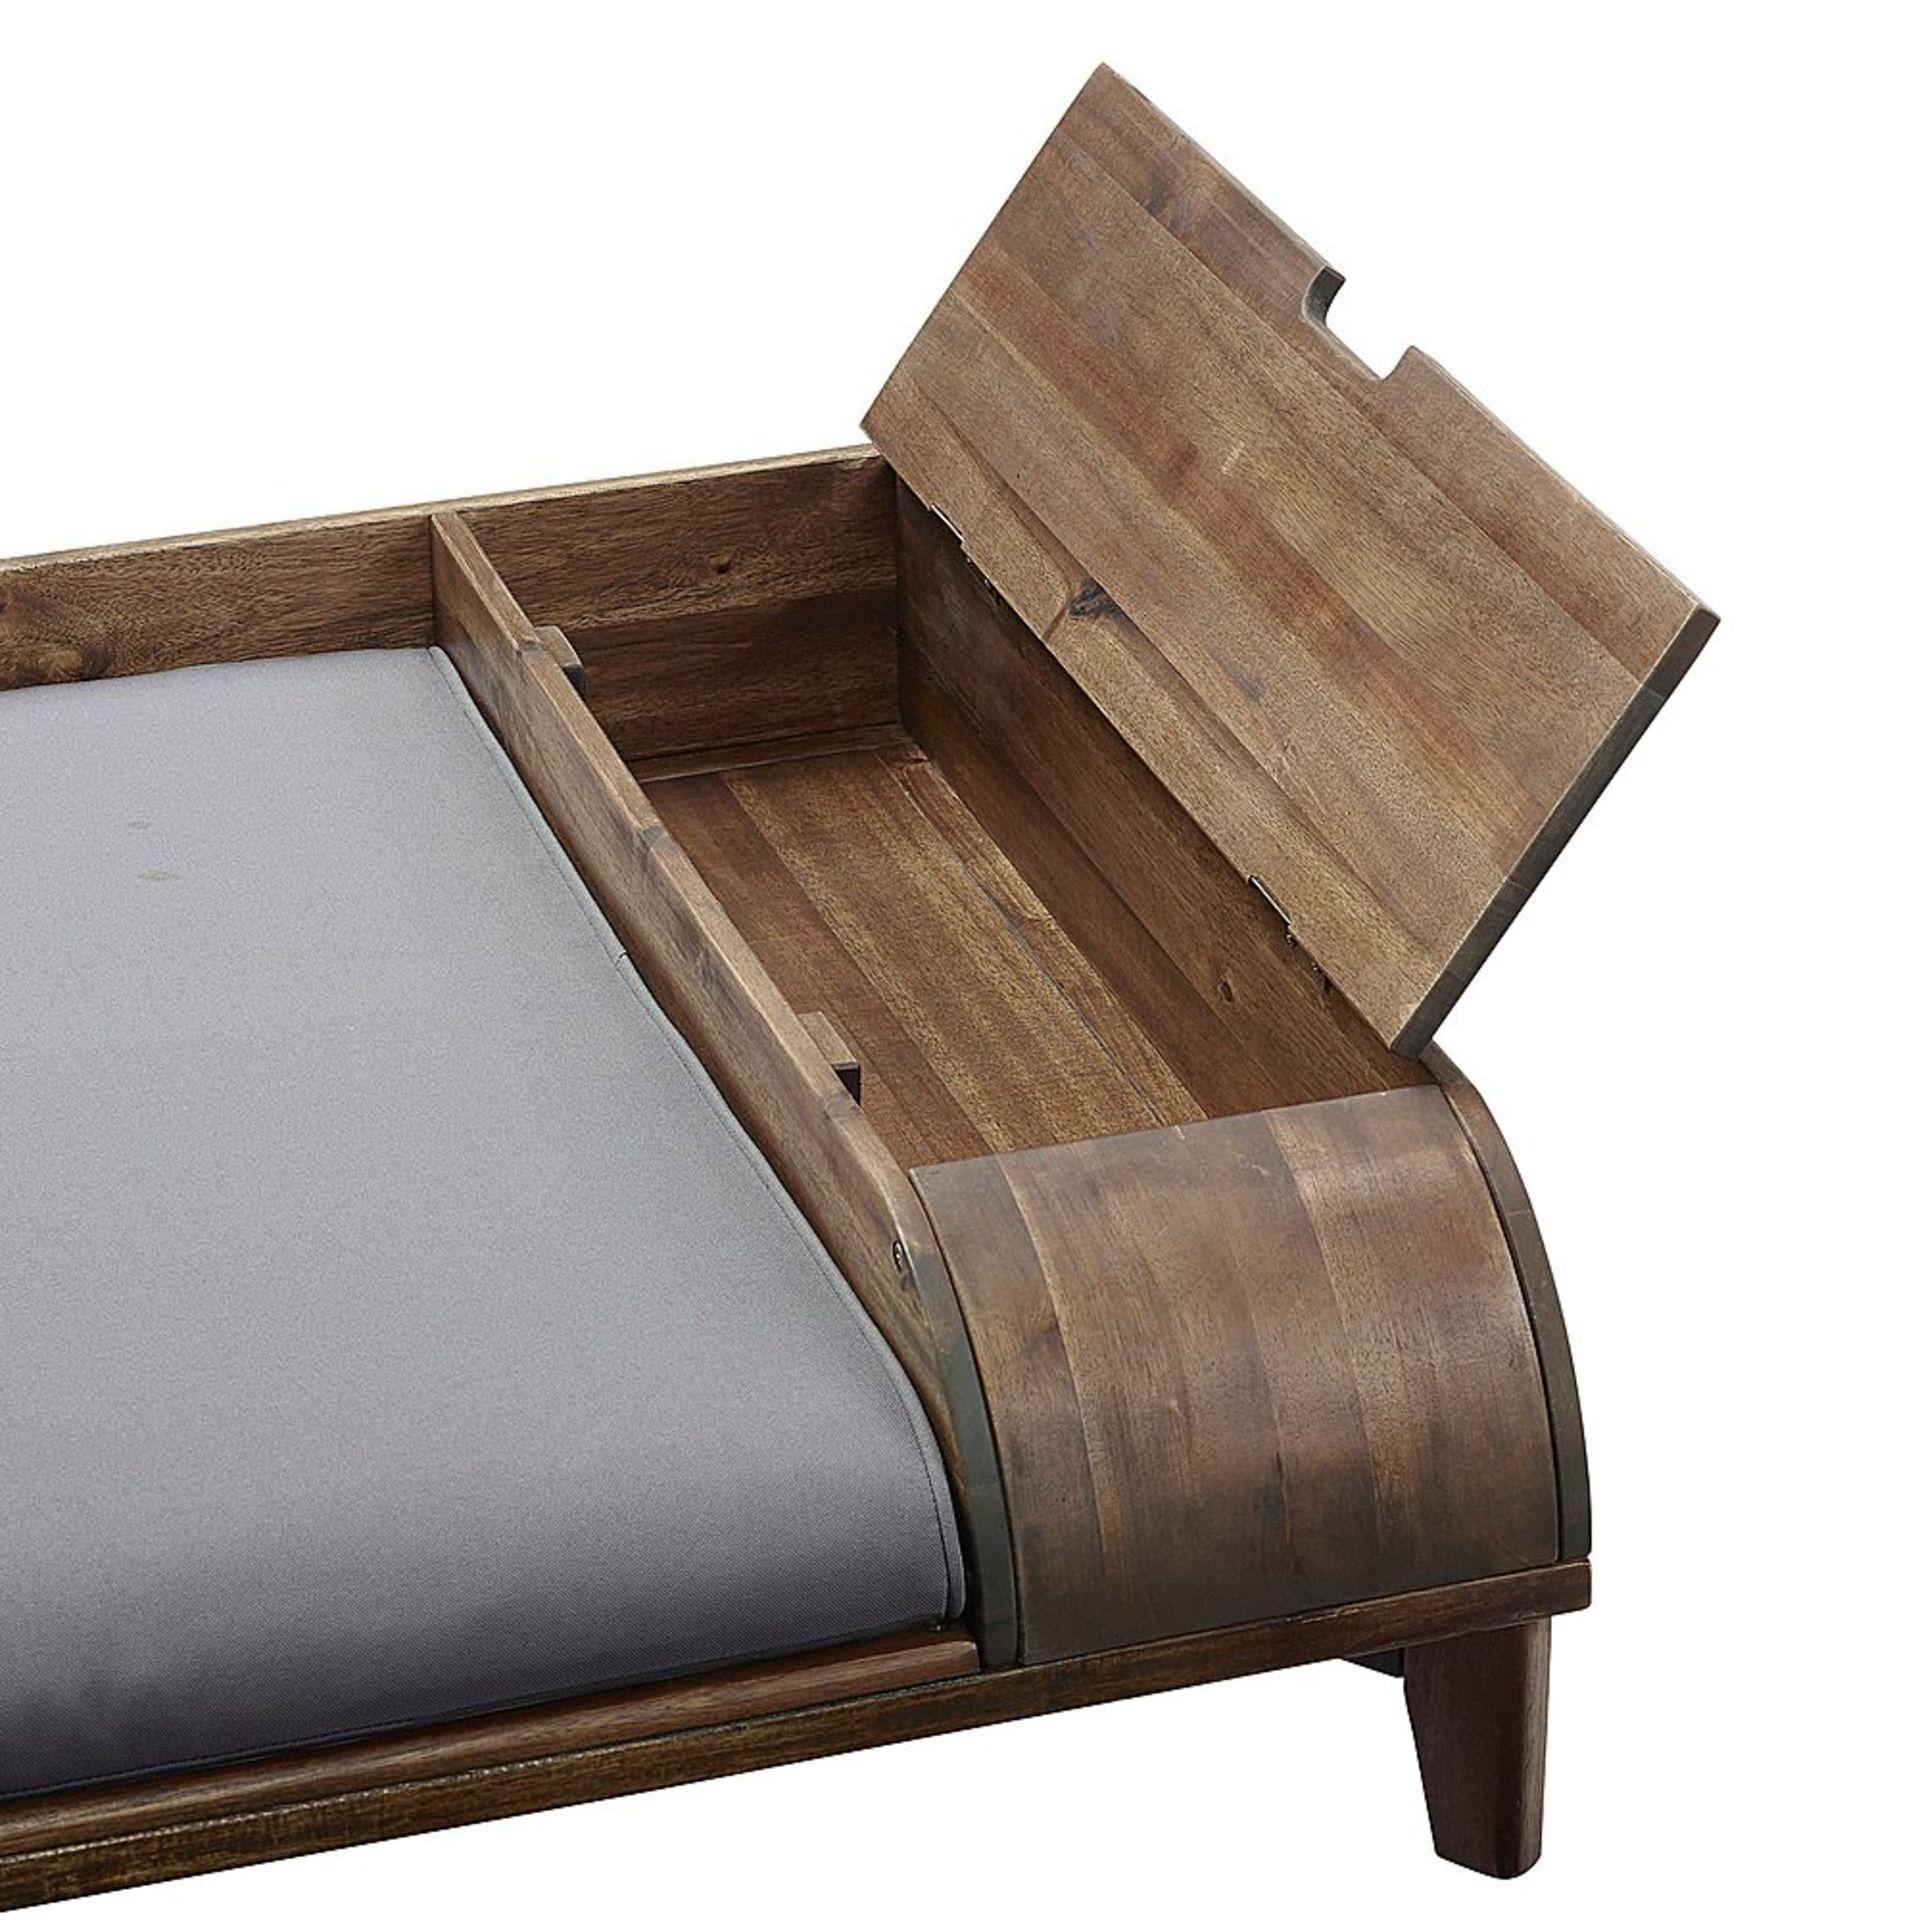 A1 PRODUCT NEW - SOLID WOOD STORAGE PED BED WITH CUSHION IN DARK BROWN/GREY - RRP Ã‚Â£245 - Image 7 of 7